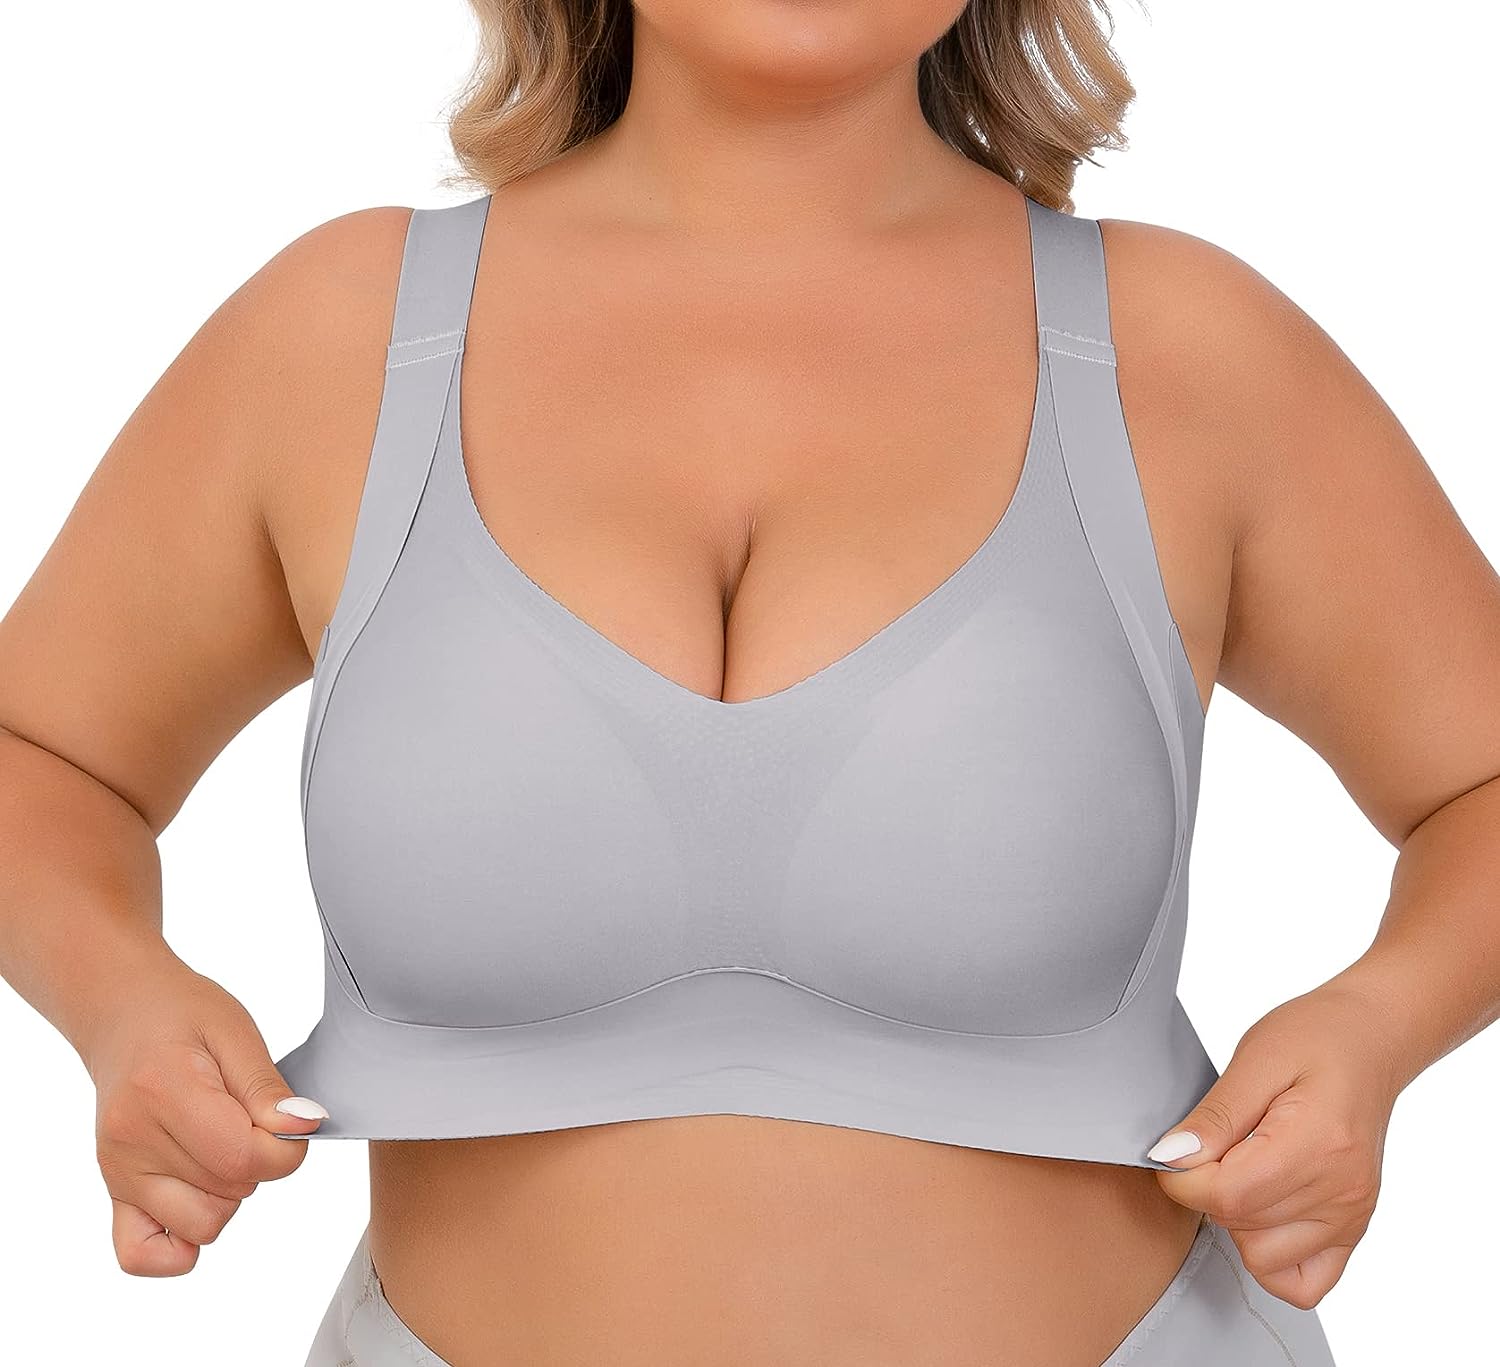 bras gif social.mp4, Irresistibly soft fabric and supportive engineering  goes into creating a supremely comfortable every day essential. Shop  Comfort Bras today at >